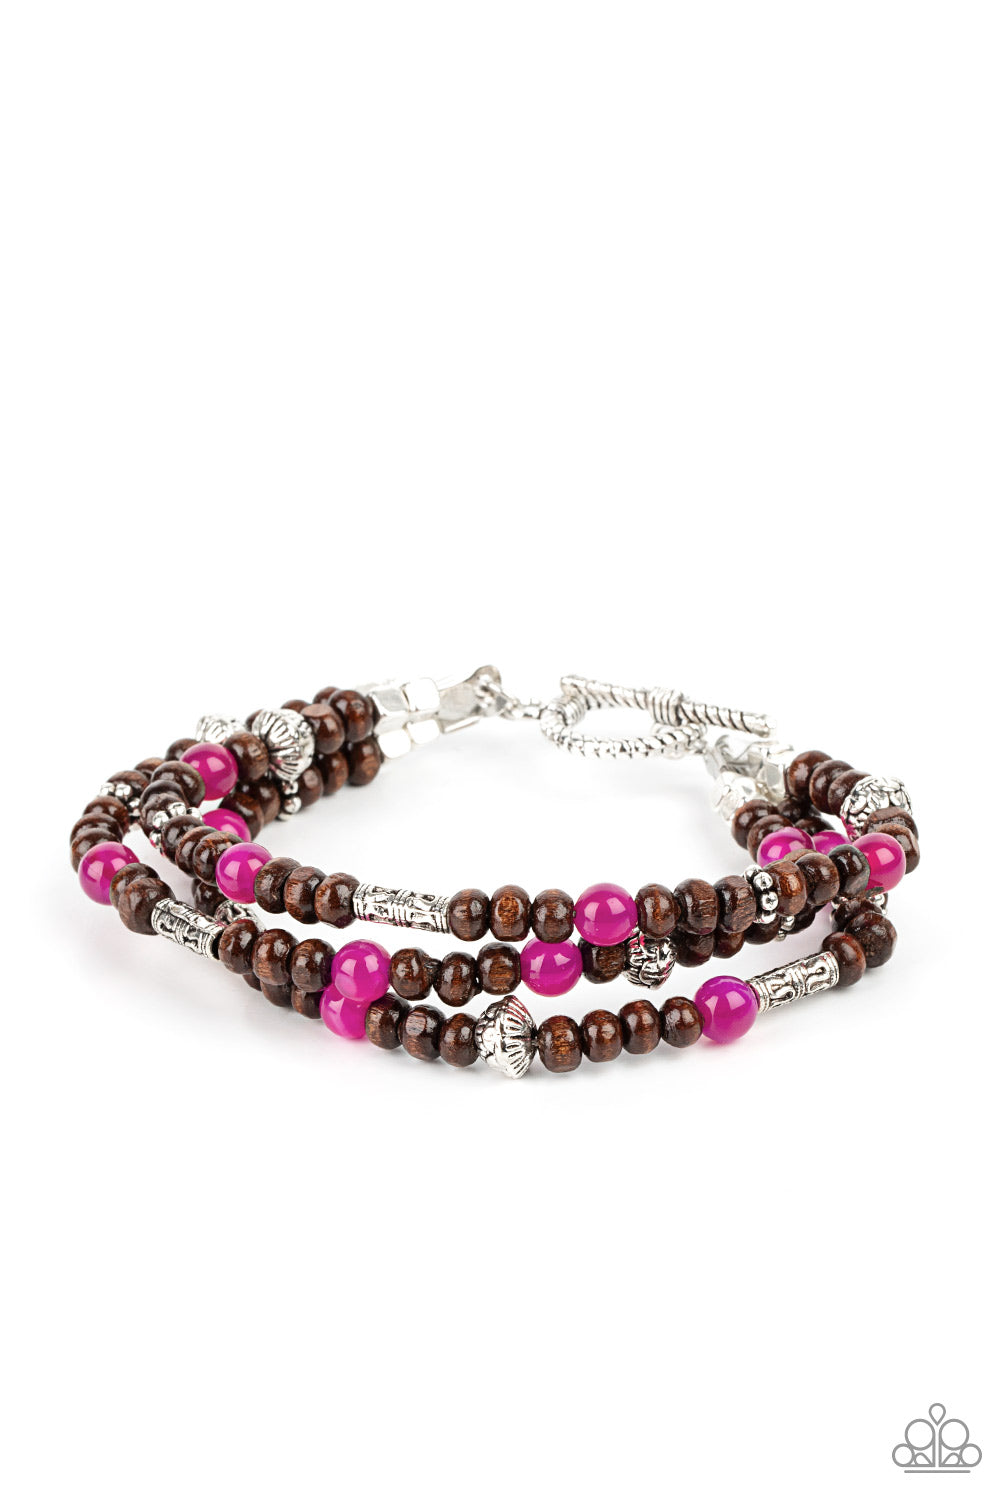 Woodsy Walkabout - Pink - Paparazzi Pink stones and ornate silver beads provide a refreshing accent to triple strands of wooden beads as they layer around the wrist in an air of earthy sophistication. Features a toggle clasp closure.